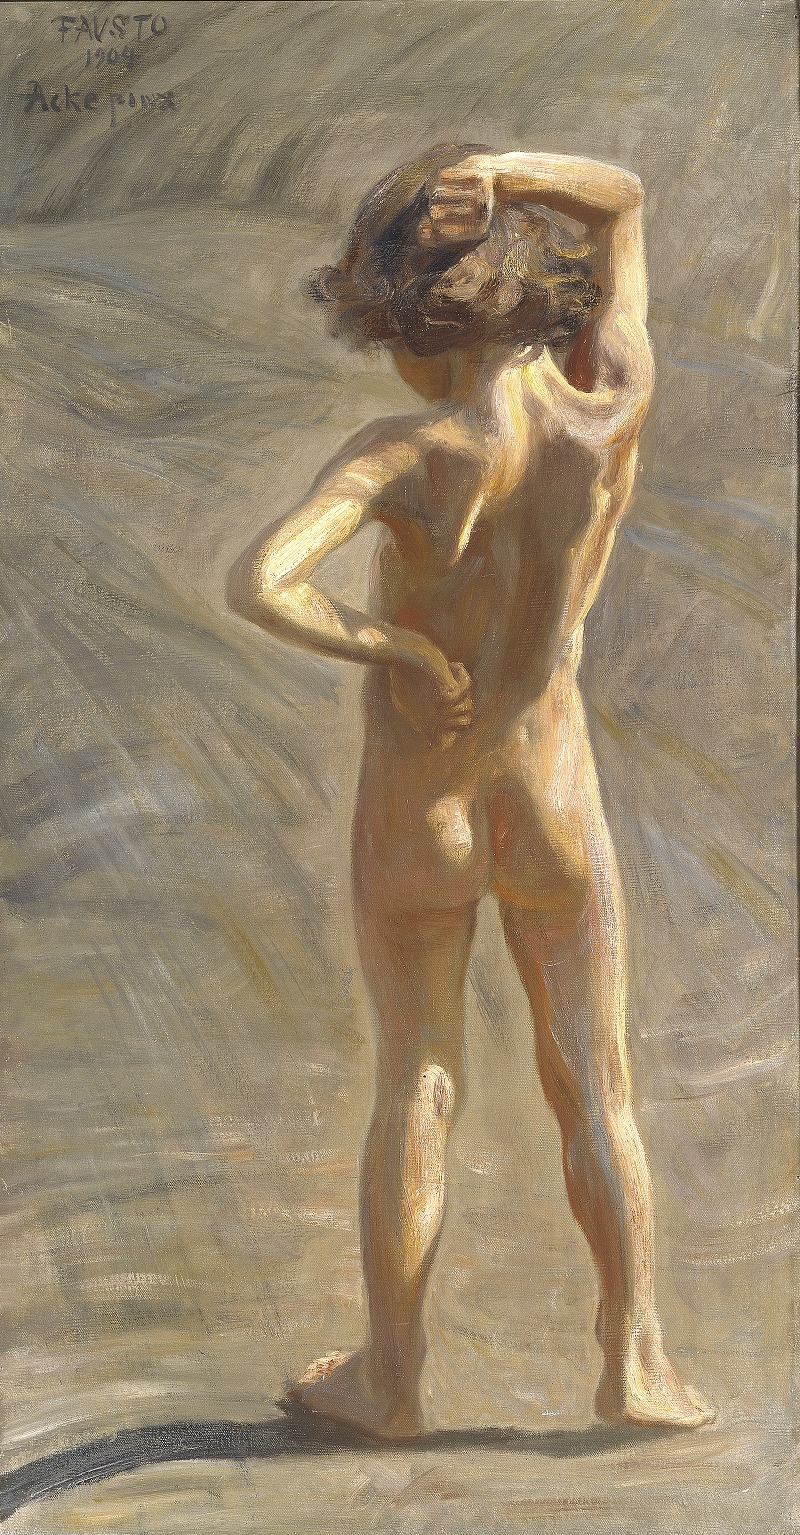 J.A.G. Acke - Fausto. Study of a Nude Boy